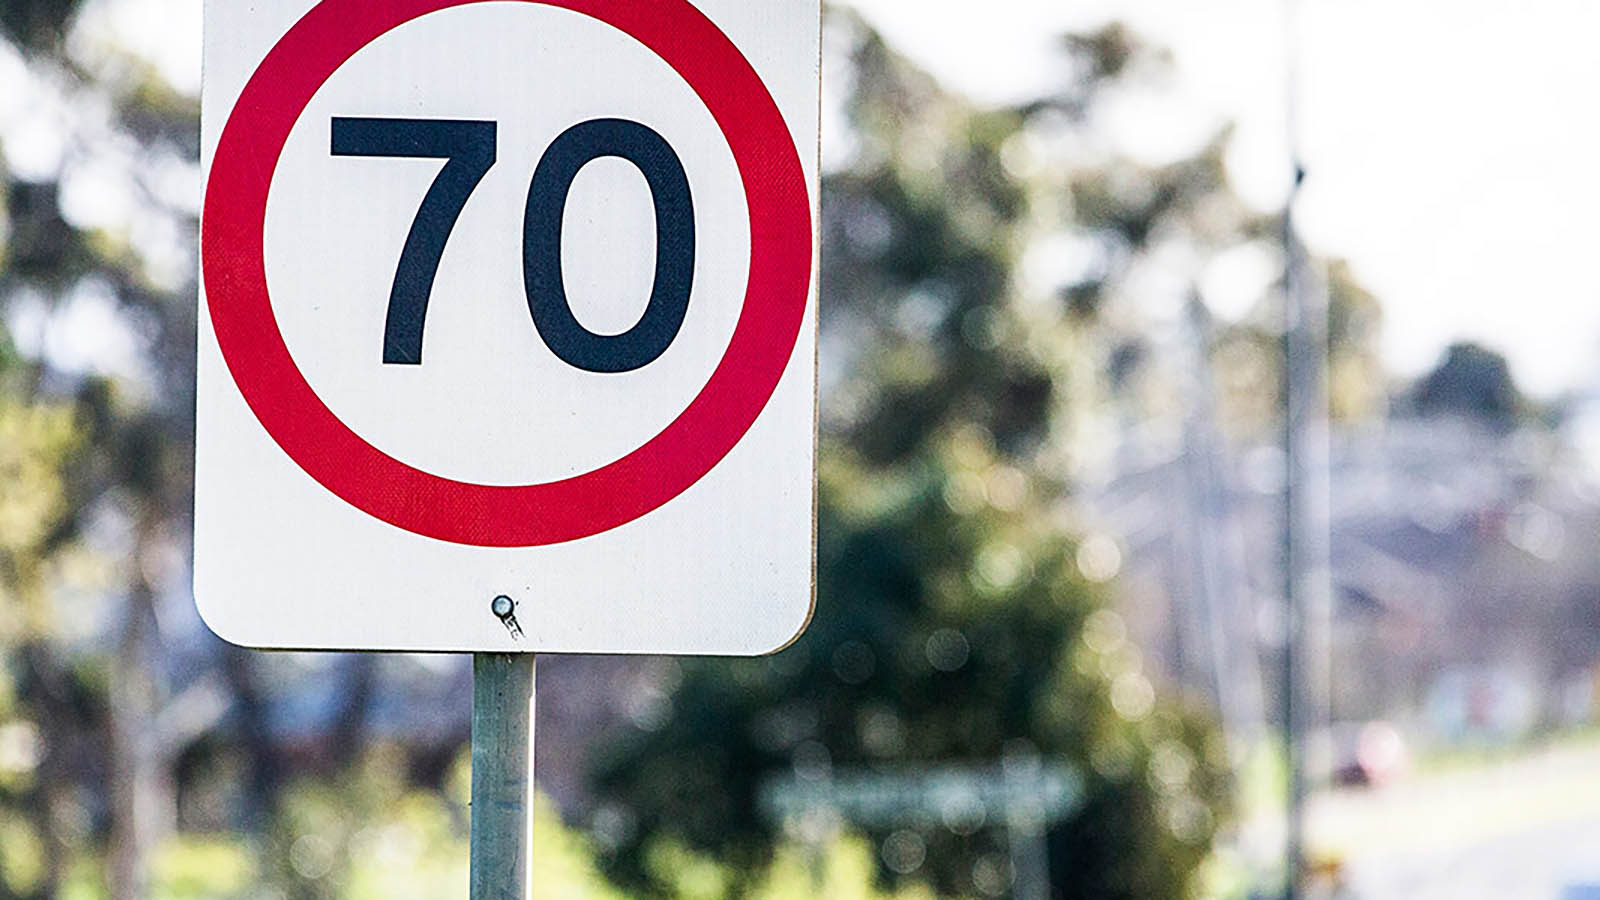 Image of speed limit sign of 70 kilometres per hour.